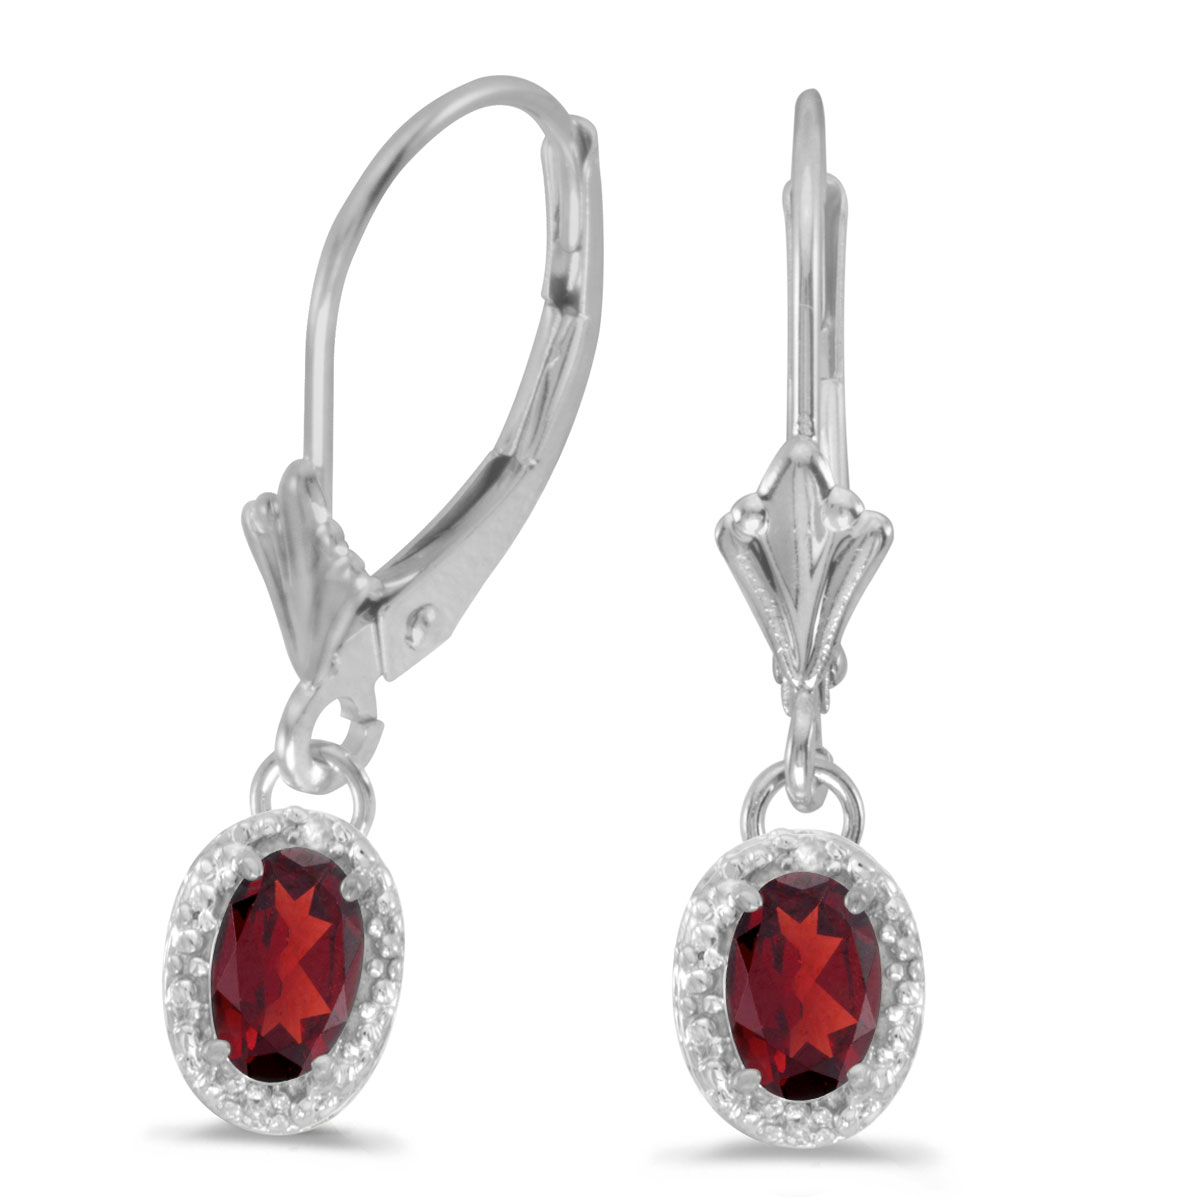 Beautiful 10k white gold leverback earrings with striking 6x4 mm garnets complemented with bright diamonds.